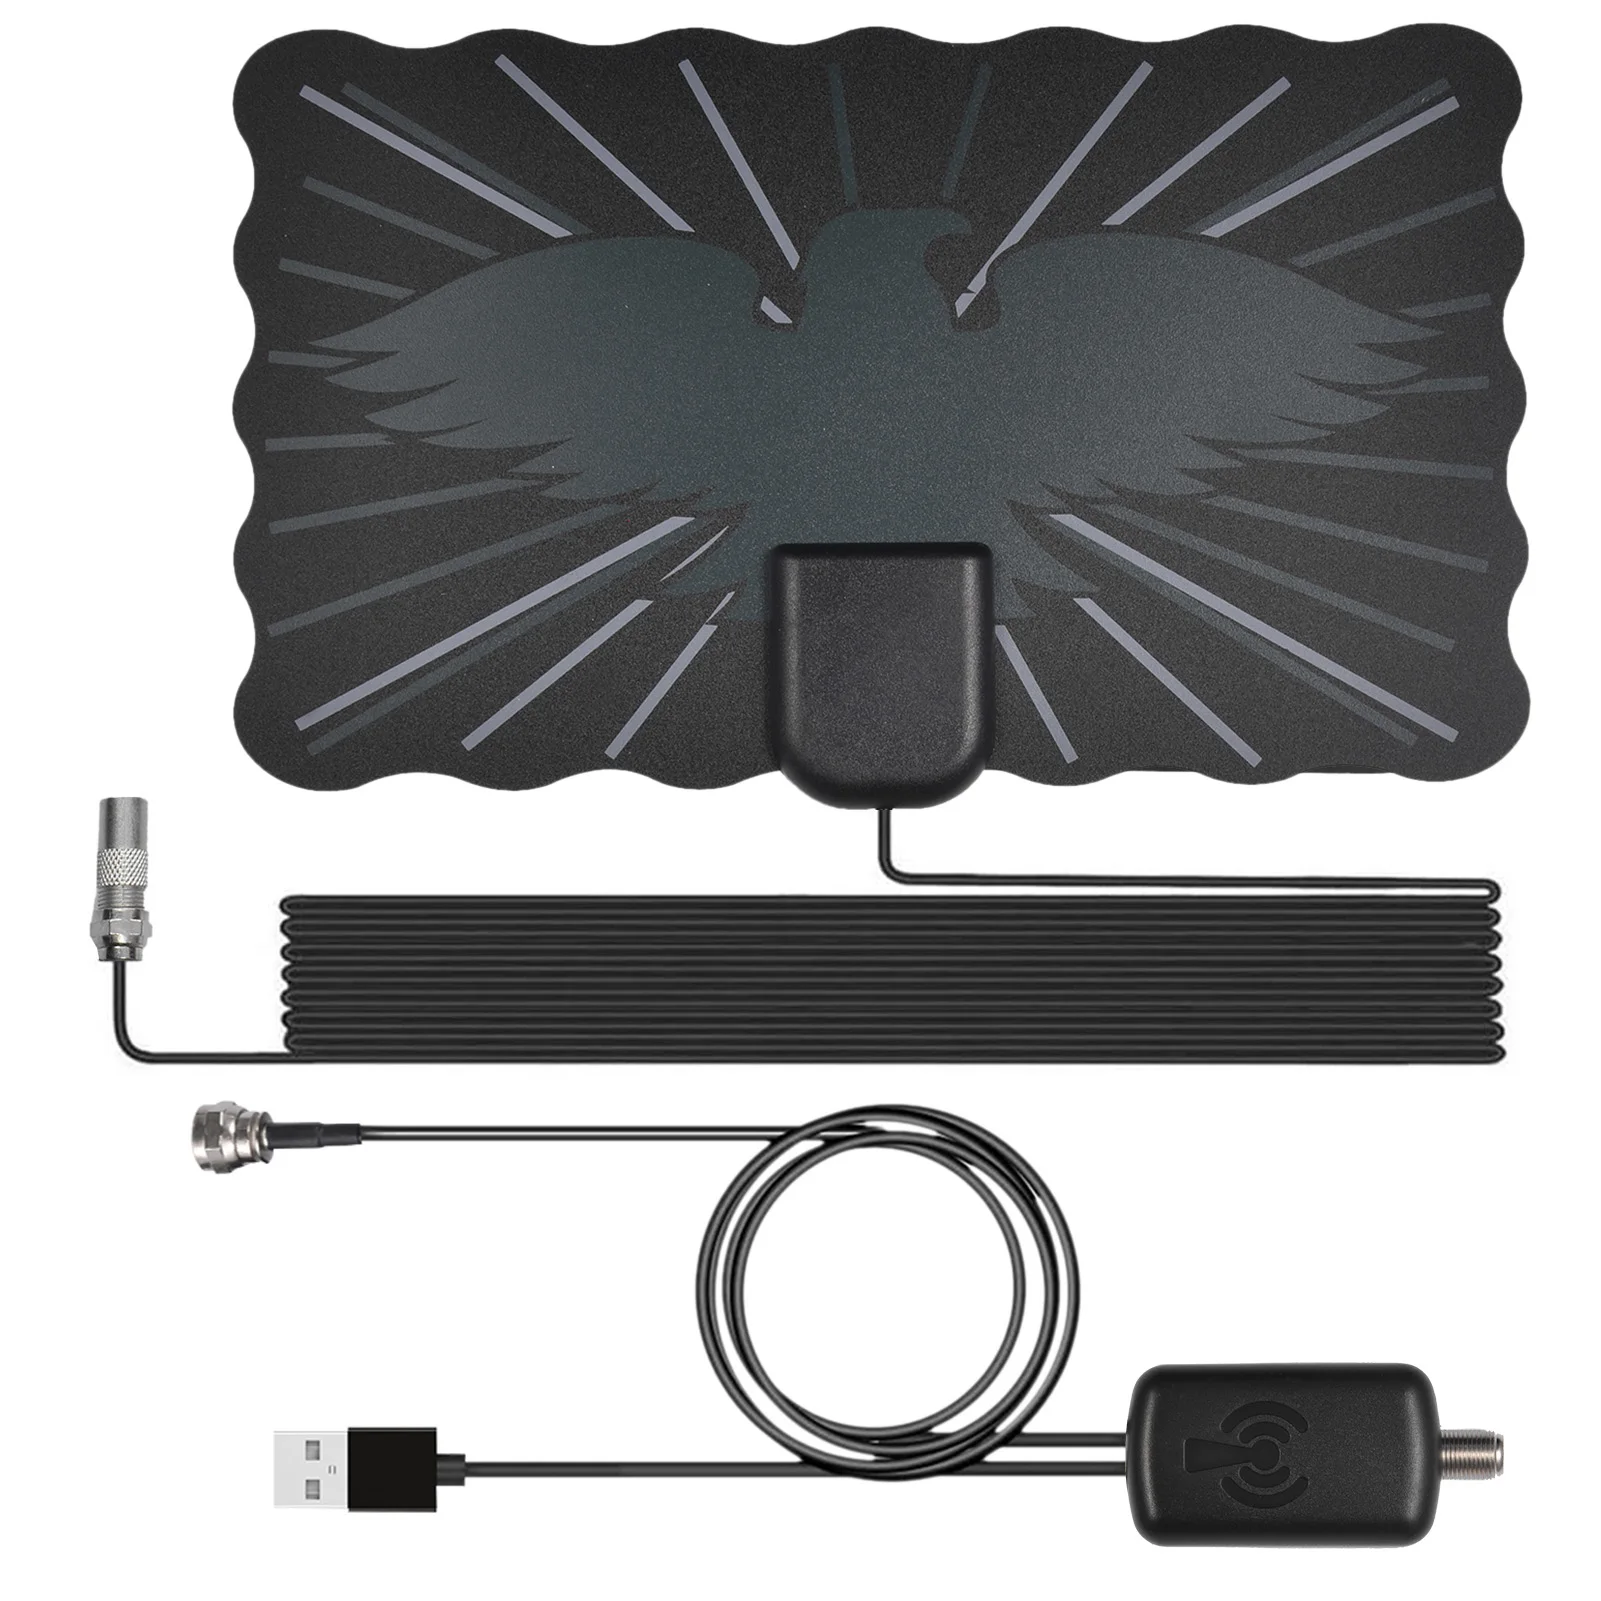 

HDTV Antenna Indoor 2000 Miles Range Antenna Amplifier Support DVBT2 Provide ABC CBS NBC PBC And Etc 4K Channels For Free